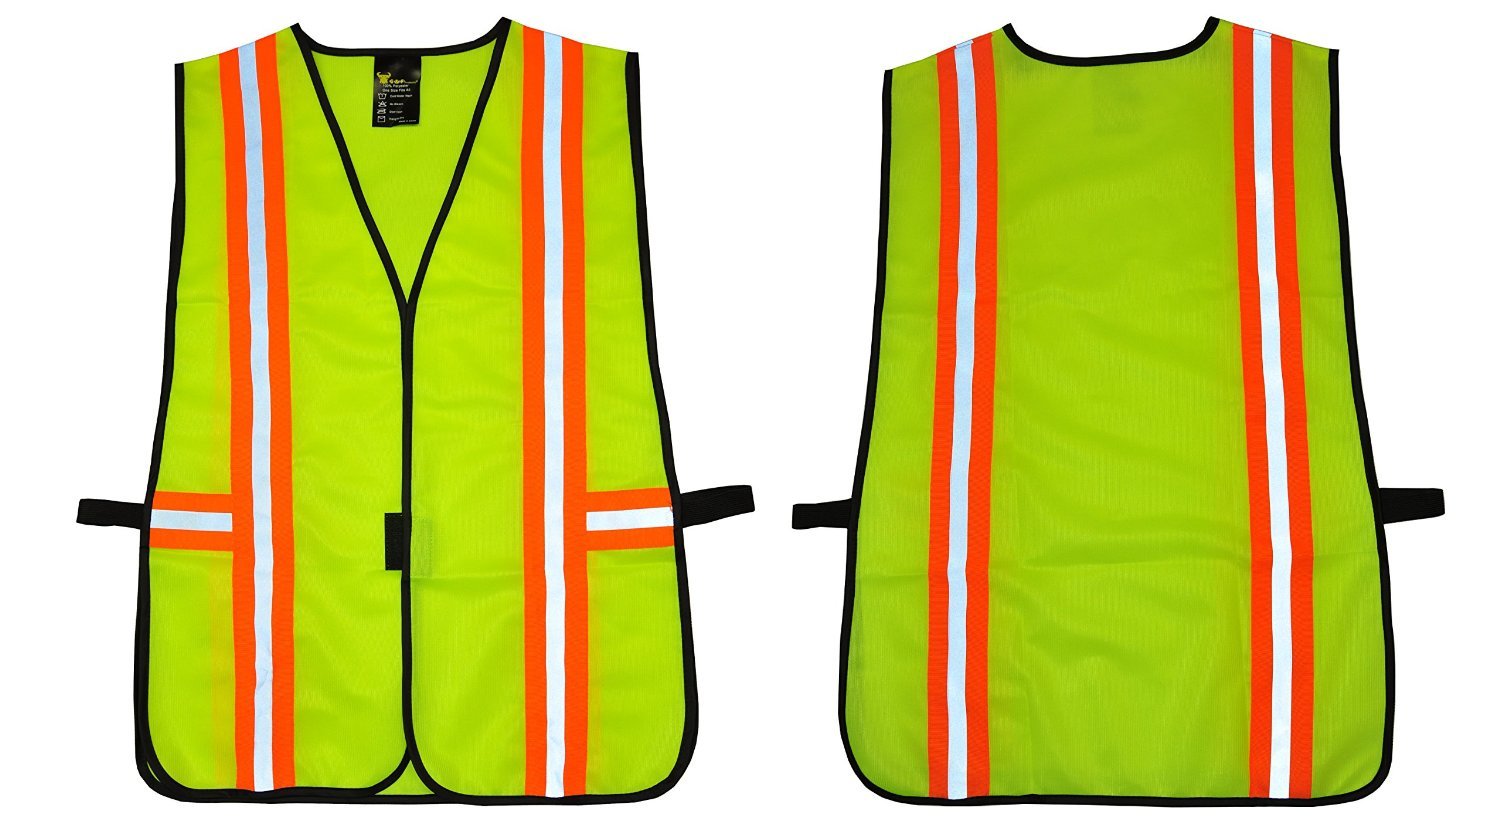 Reflective Vests for Women